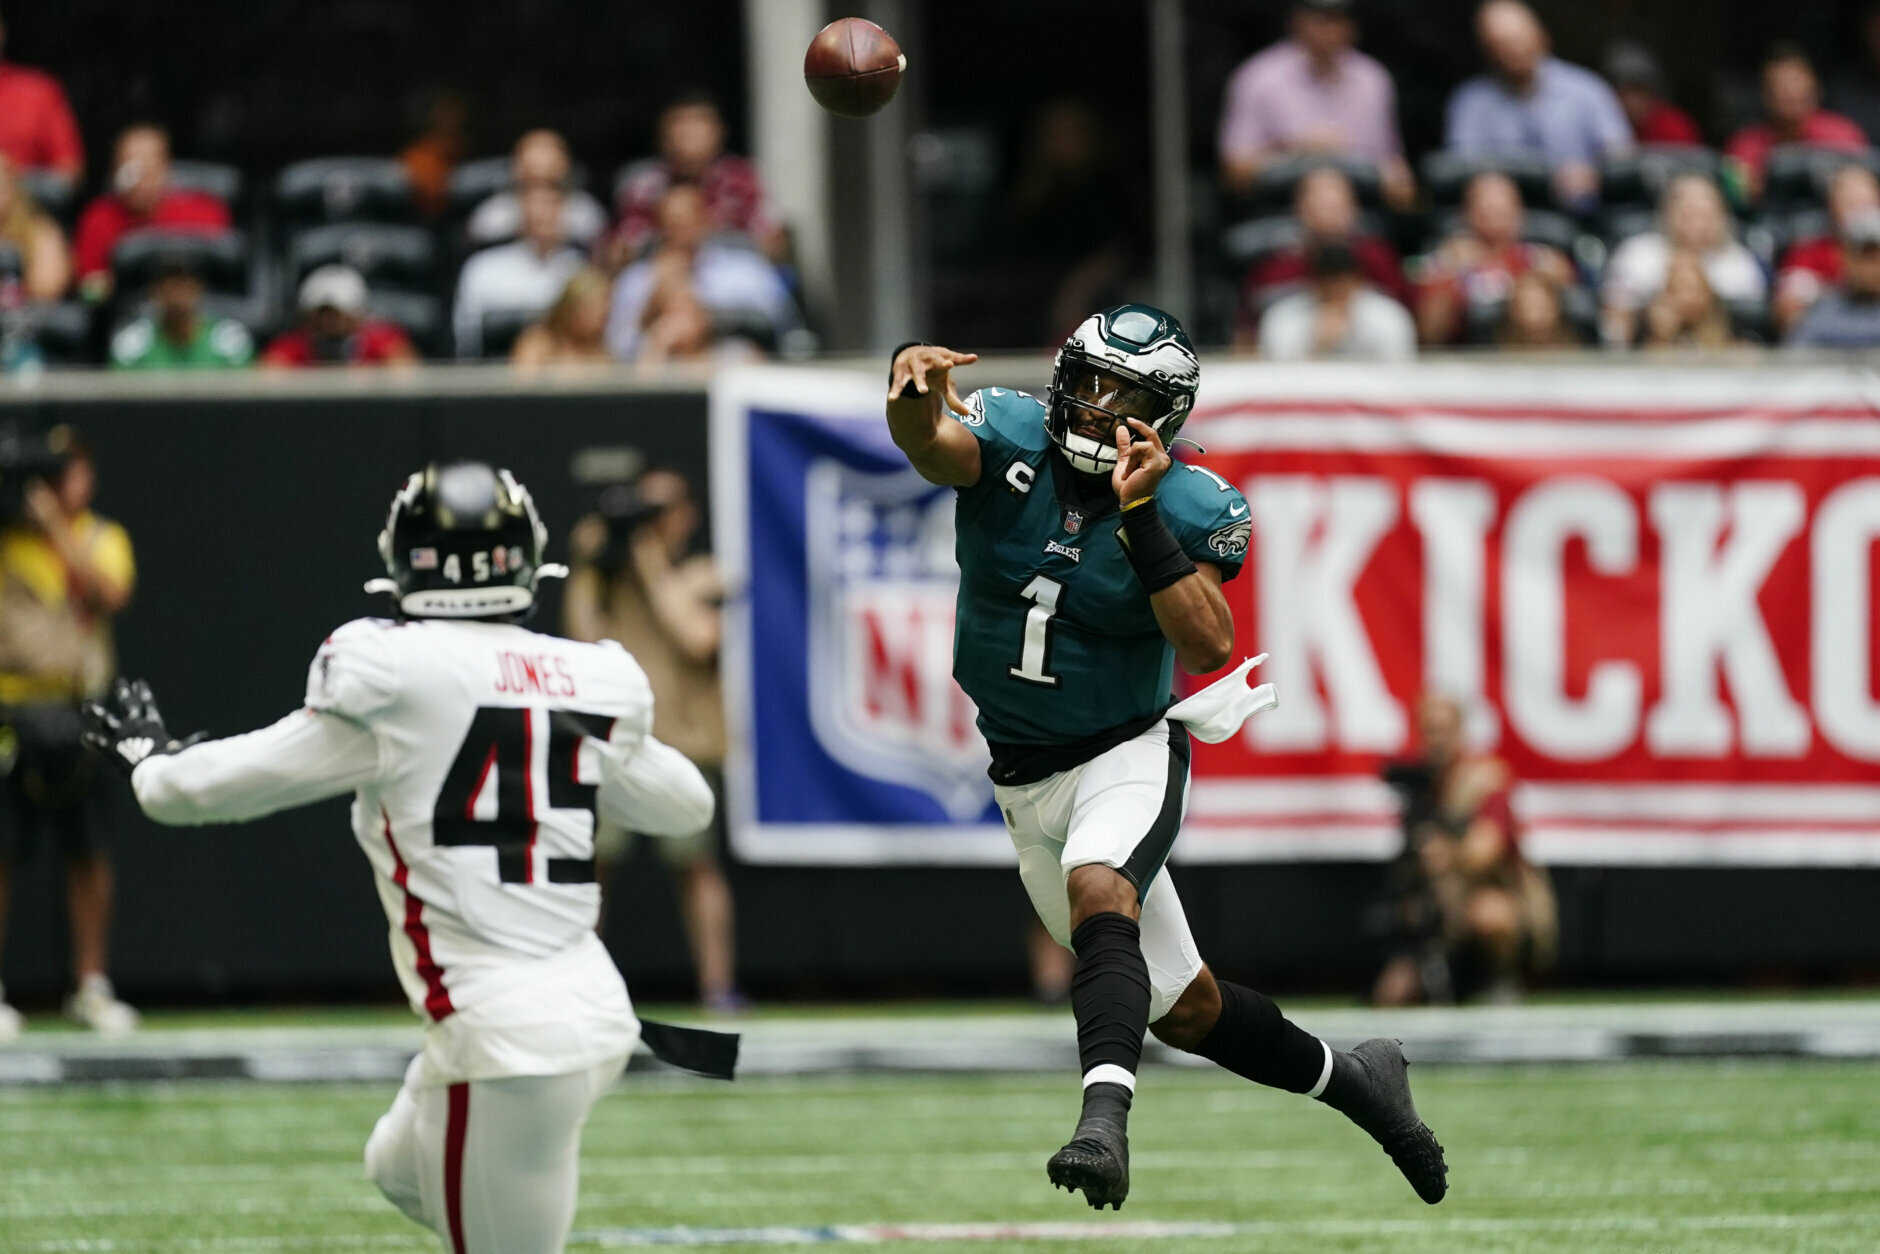 <p><b><i>Eagles 32<br />
Falcons 6</i></b></p>
<p>Don&#8217;t look now but Philly was the only NFC East team to win in Week 1 and surprisingly have the early edge in the division. Jalen Hurts looked legit in his Week 1 debut and the Eagles defense looked the best it has probably since the Super Bowl season four years ago. If they even stay close to the 49ers next week, I&#8217;ll be impressed.</p>
